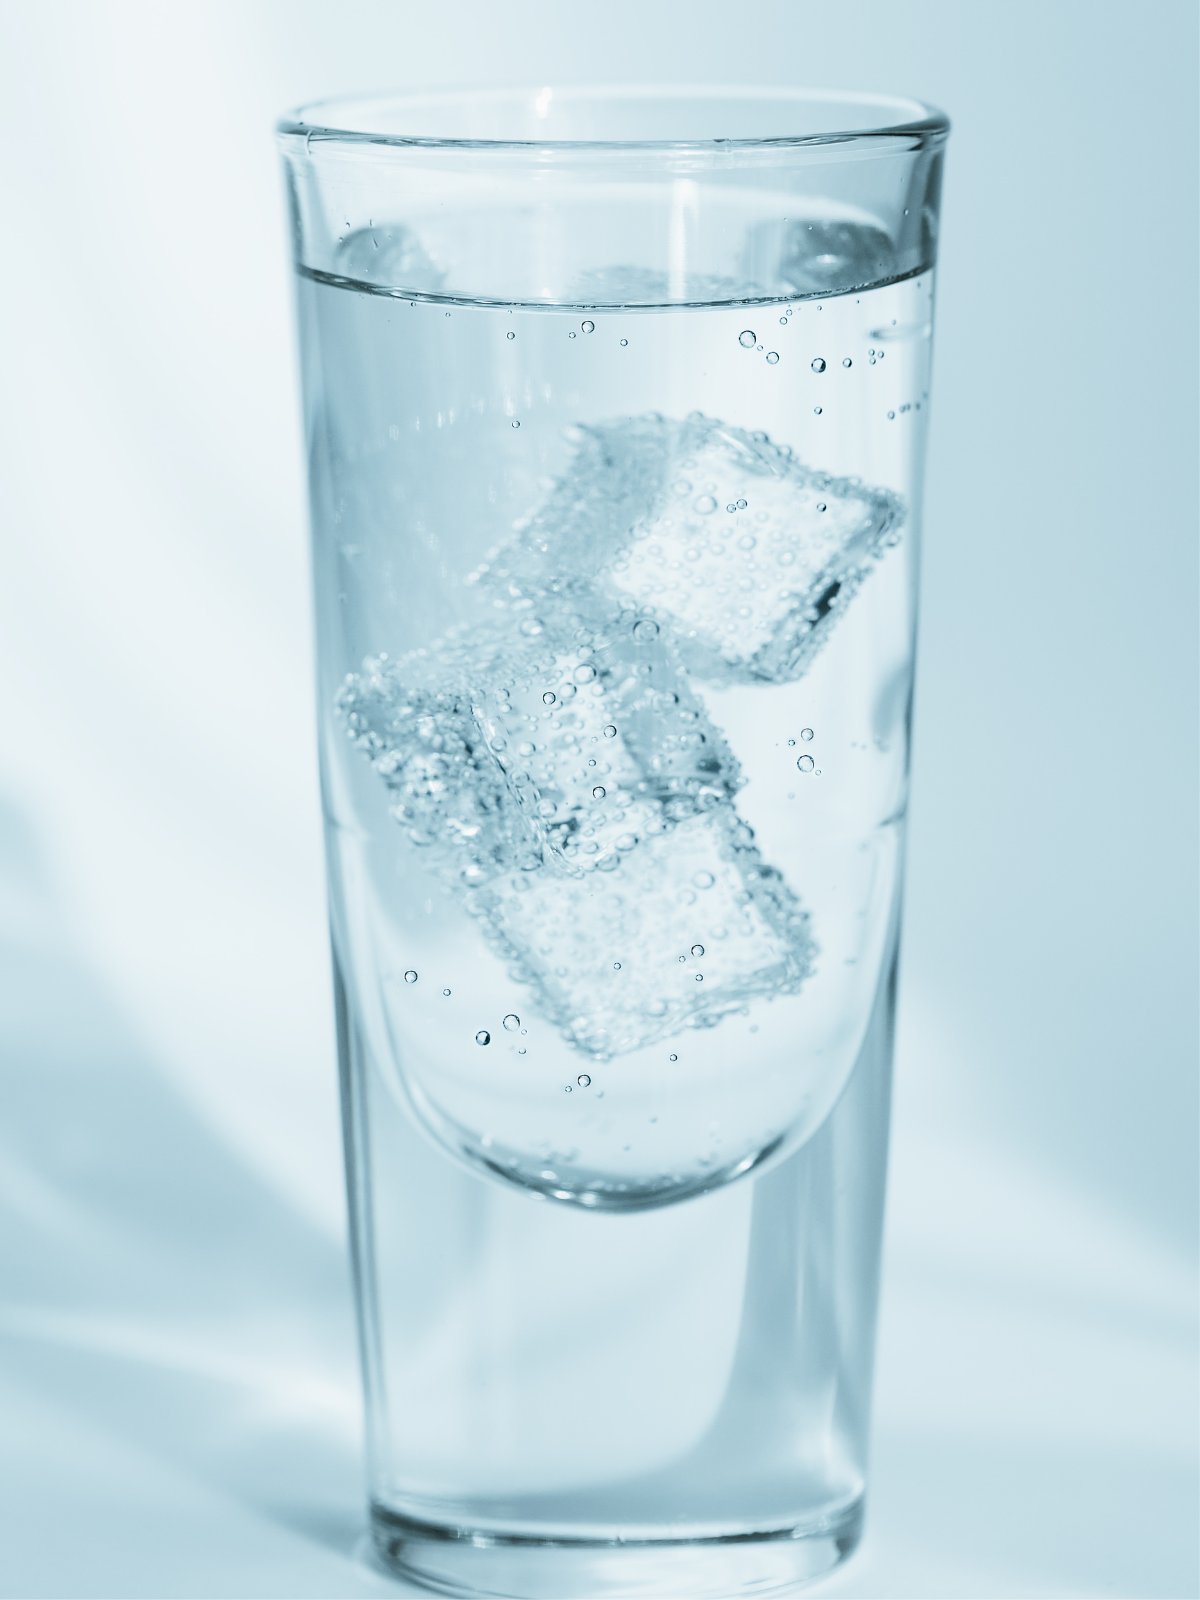 Benefits of Mineral Water